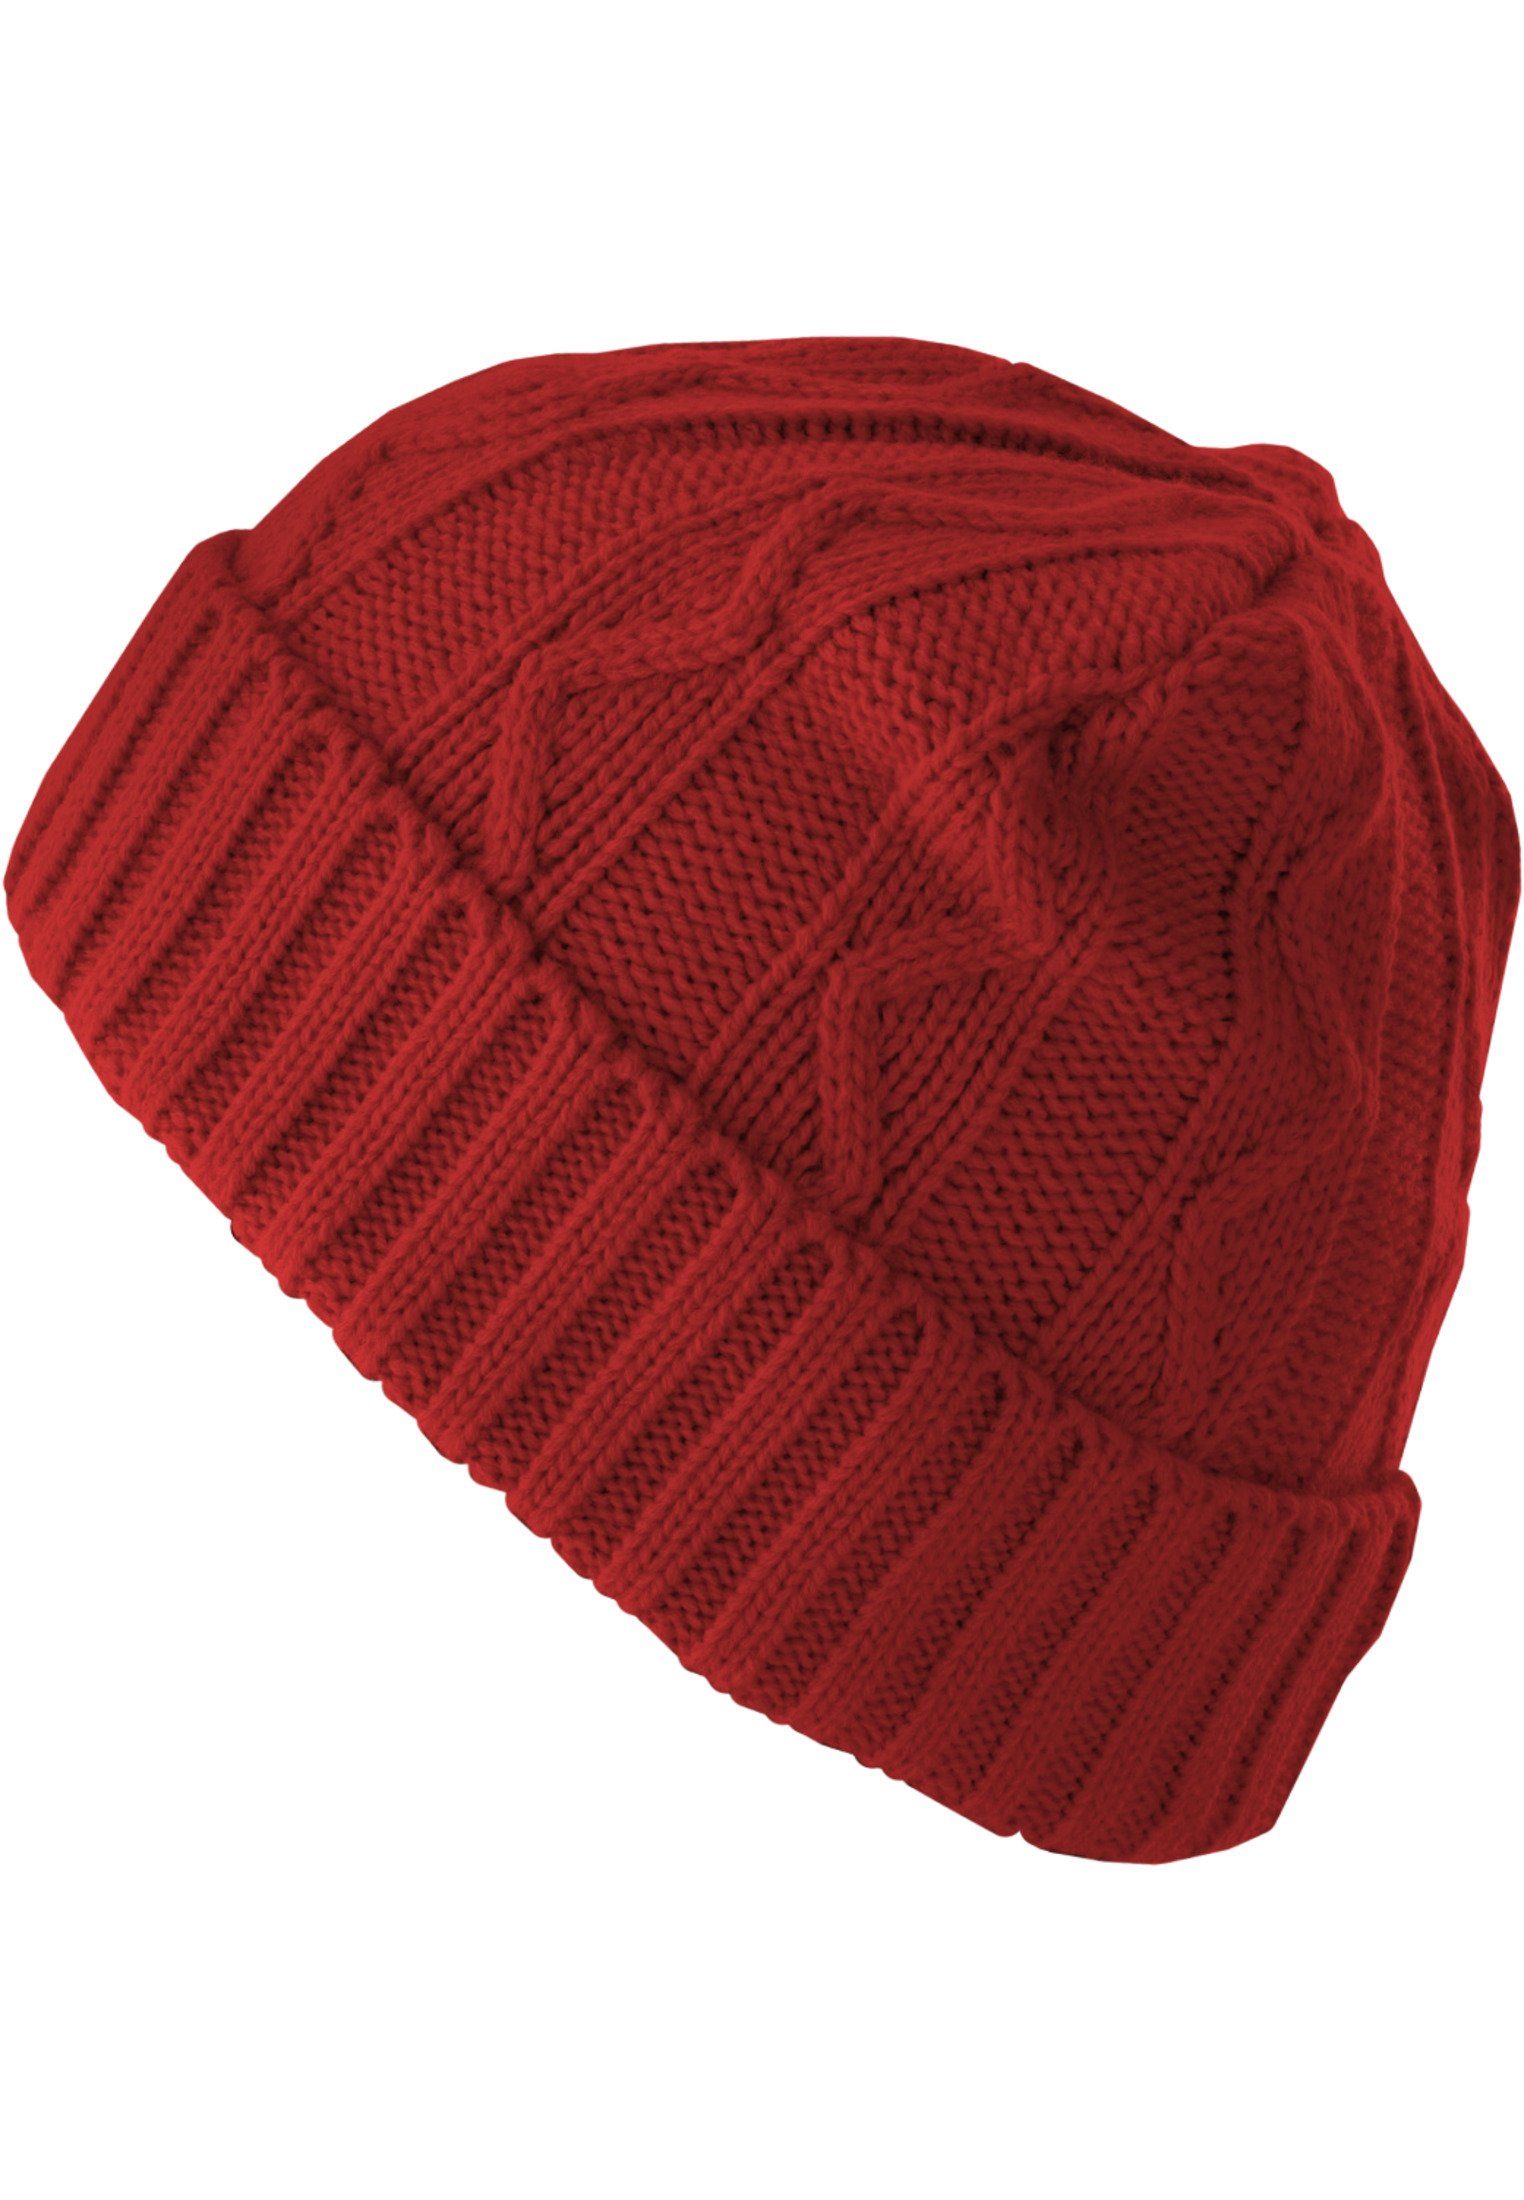 Beanie Cable red Flap MSTRDS (1-St) Accessoires Beanie